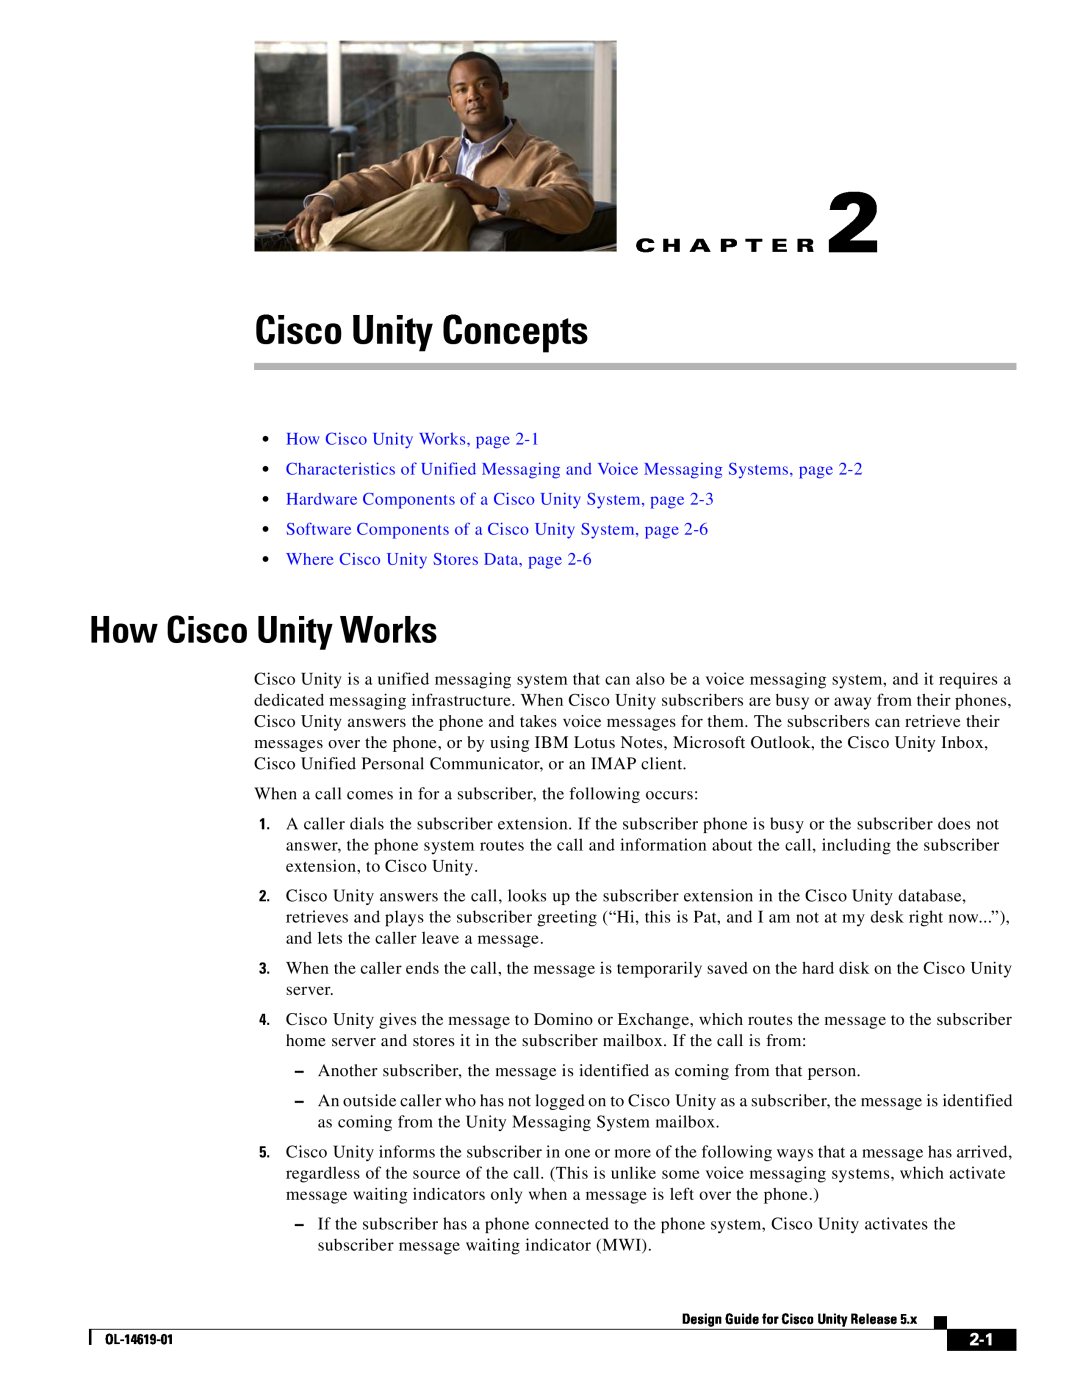 Cisco Systems OL-14619-01 manual Cisco Unity Concepts, How Cisco Unity Works, page, Where Cisco Unity Stores Data, page 